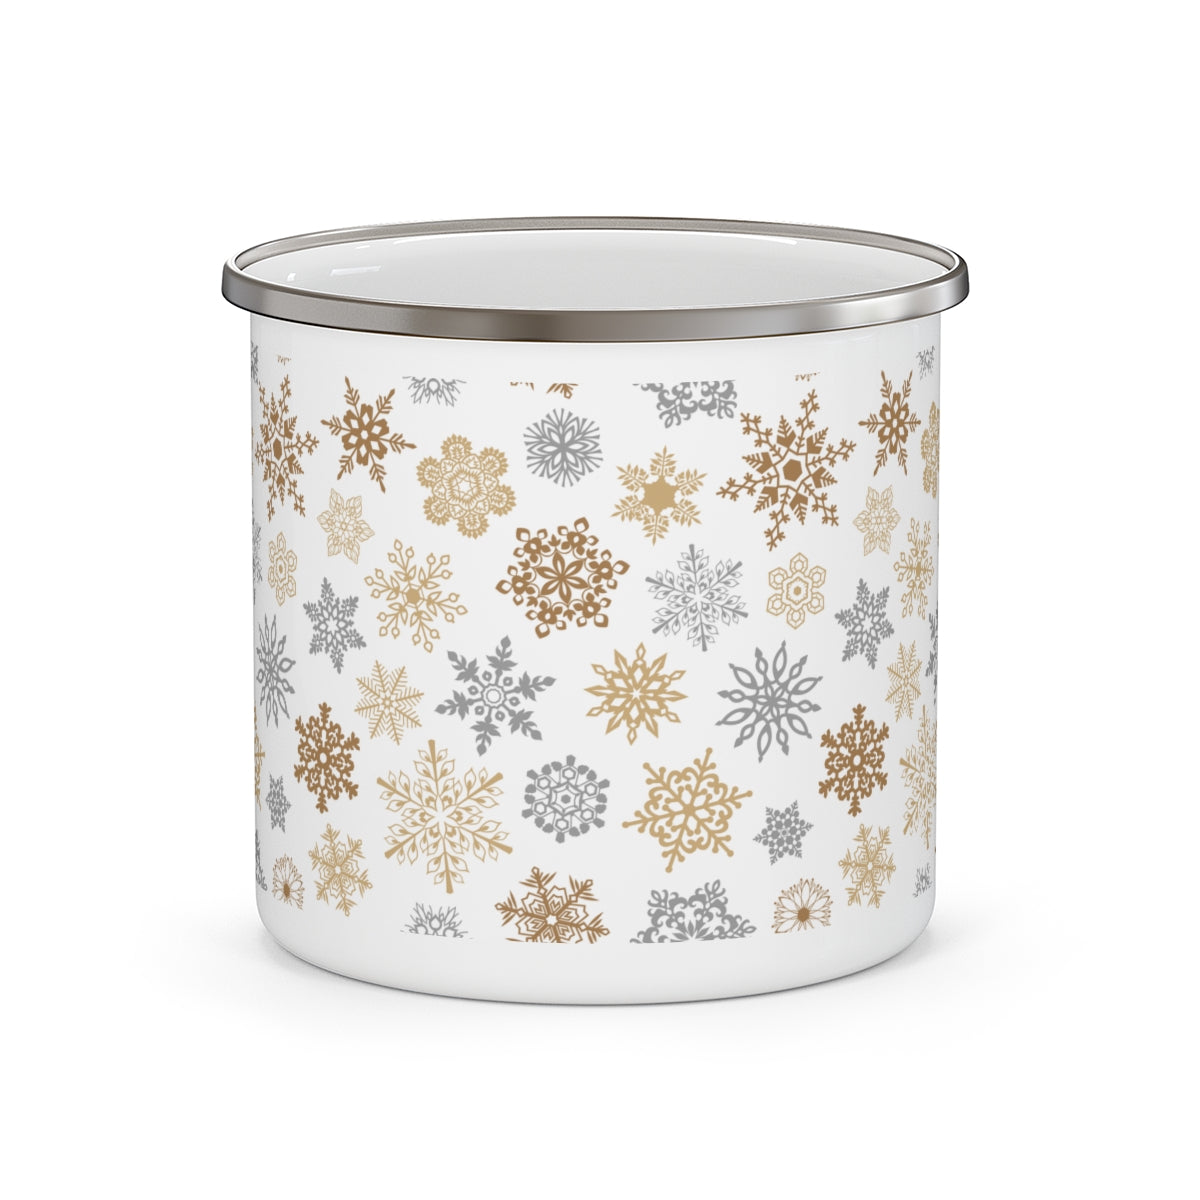 Gold and Silver Snowflakes Stainless Steel Camping Mug